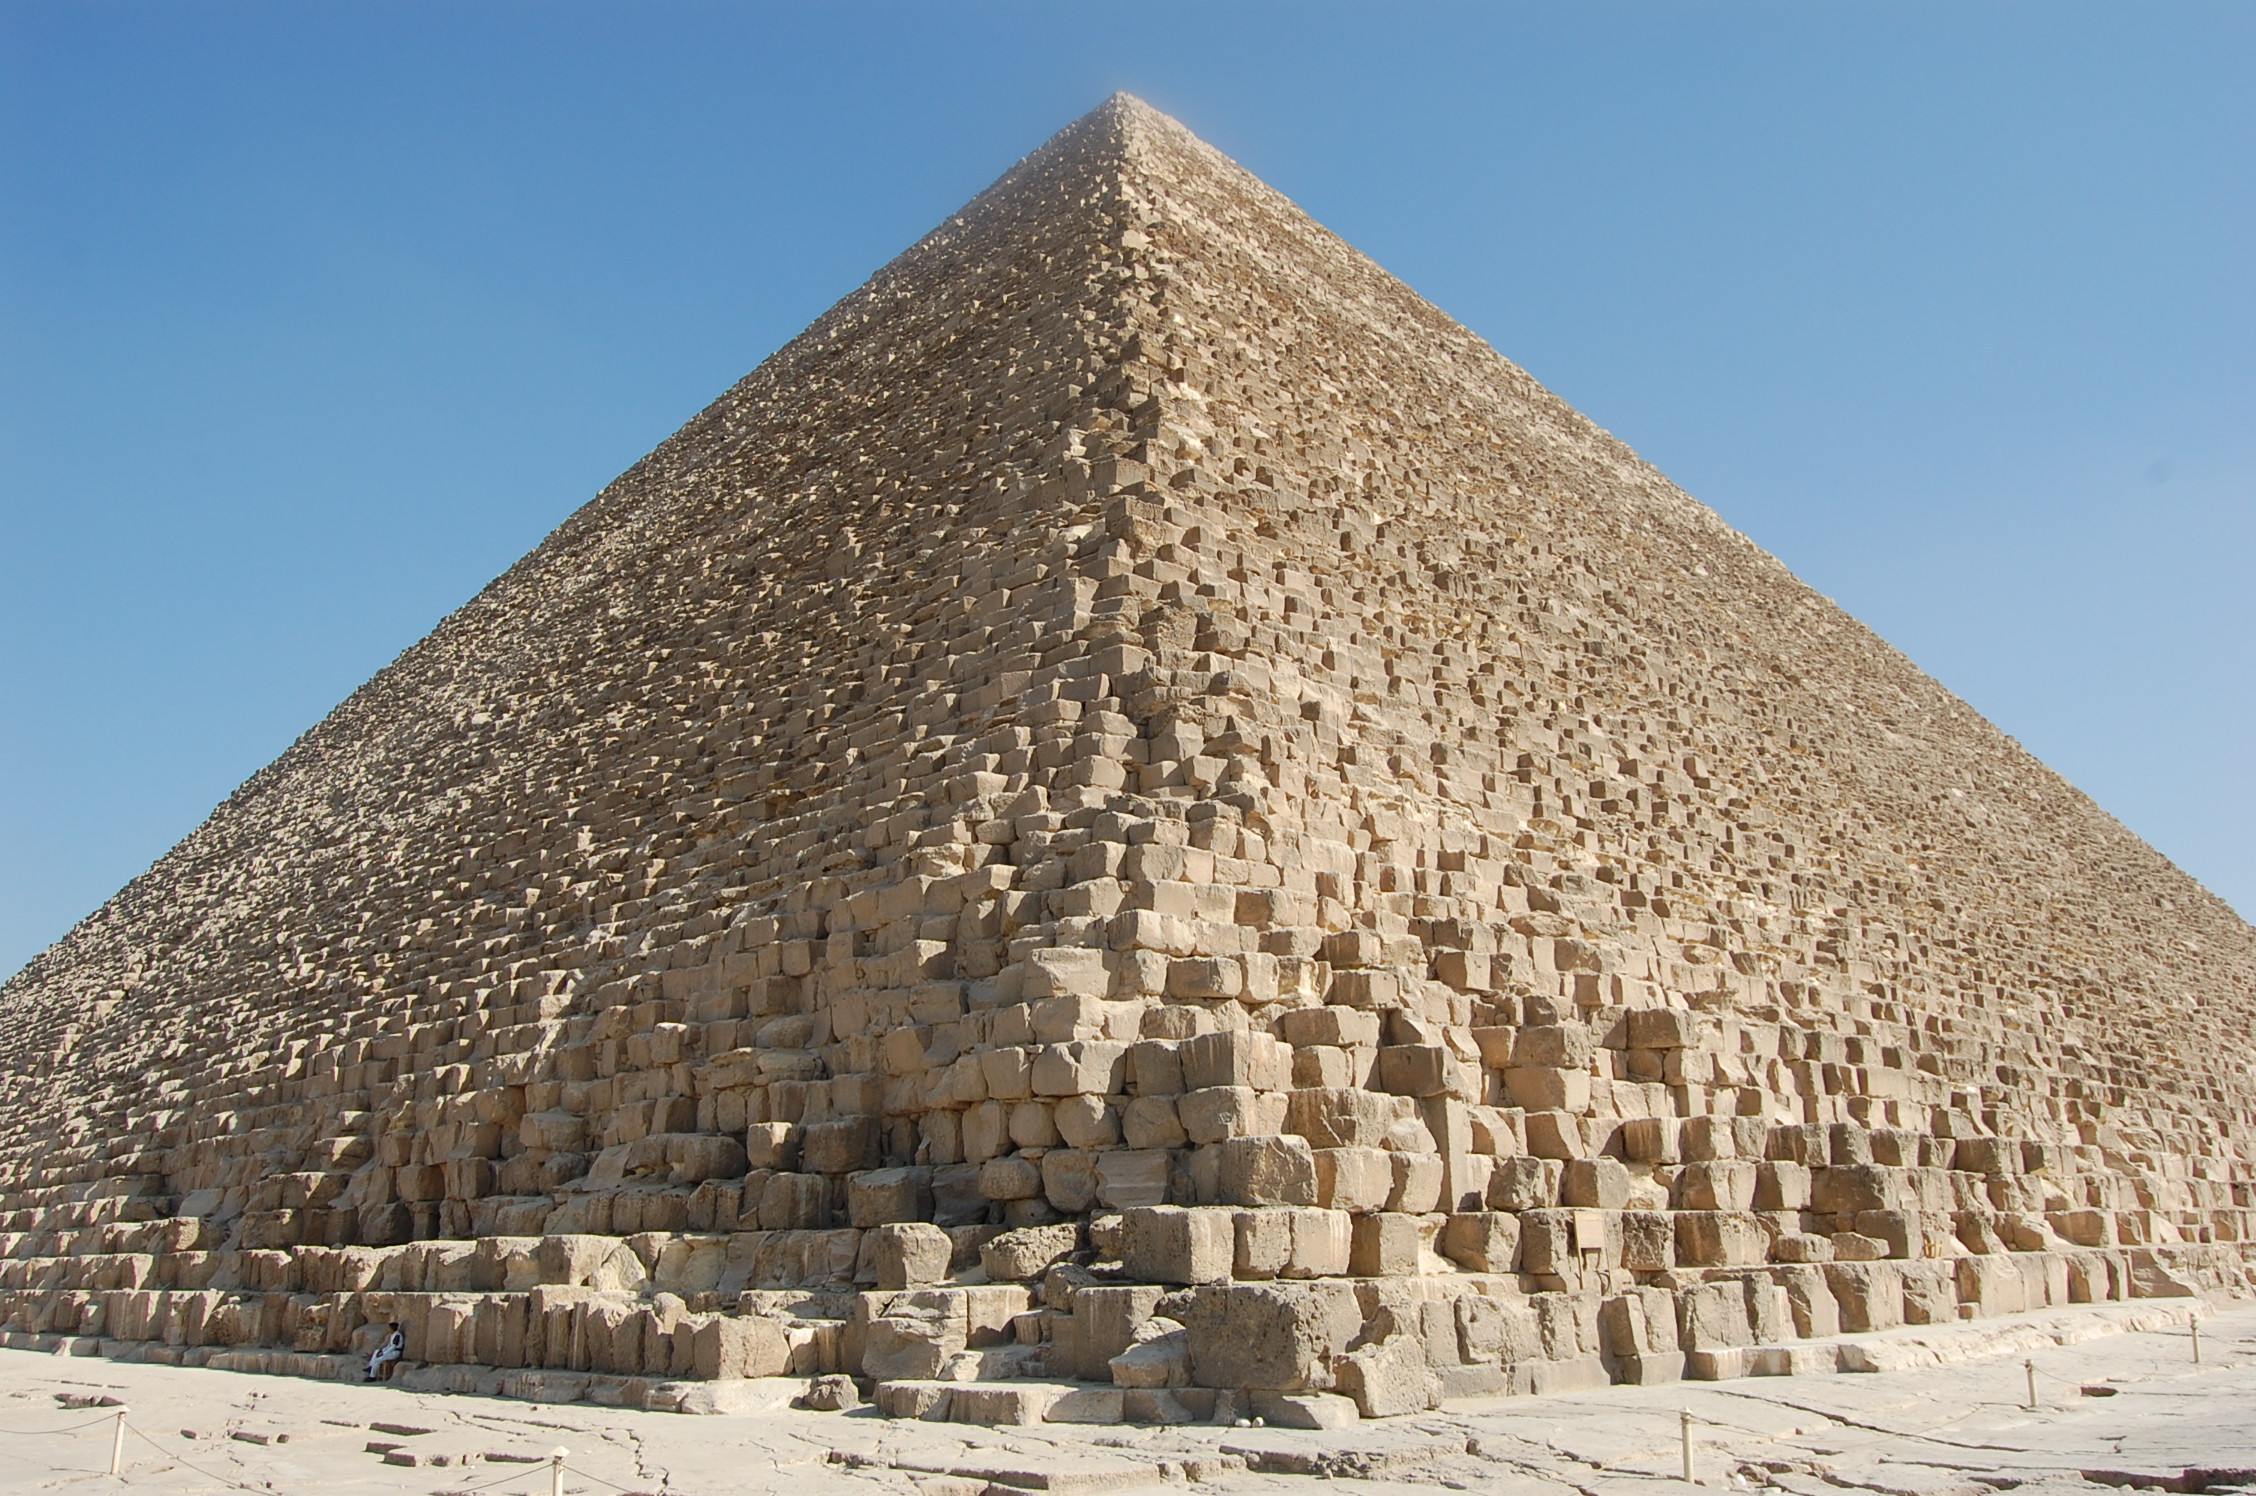 The Pyramids of Giza and the Sphinx too! – My Two Piasters